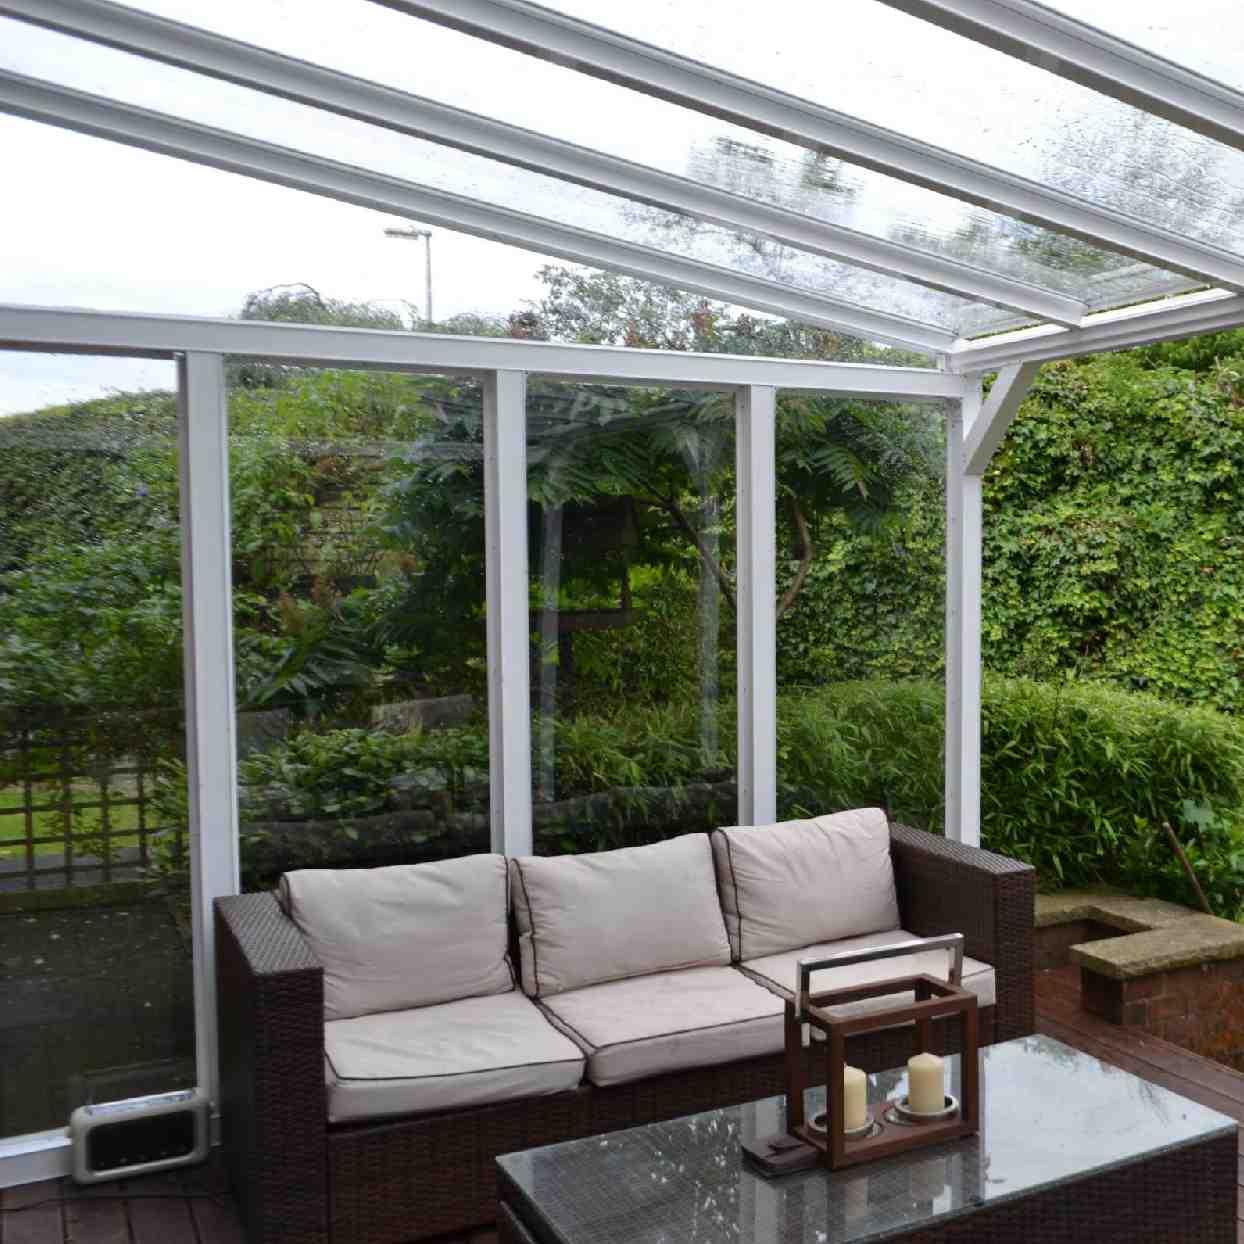 Buy Omega Verandah White with 6mm Glass Clear Plate Polycarbonate Glazing - 7.7m (W) x 1.5m (P), (4) Supporting Posts online today